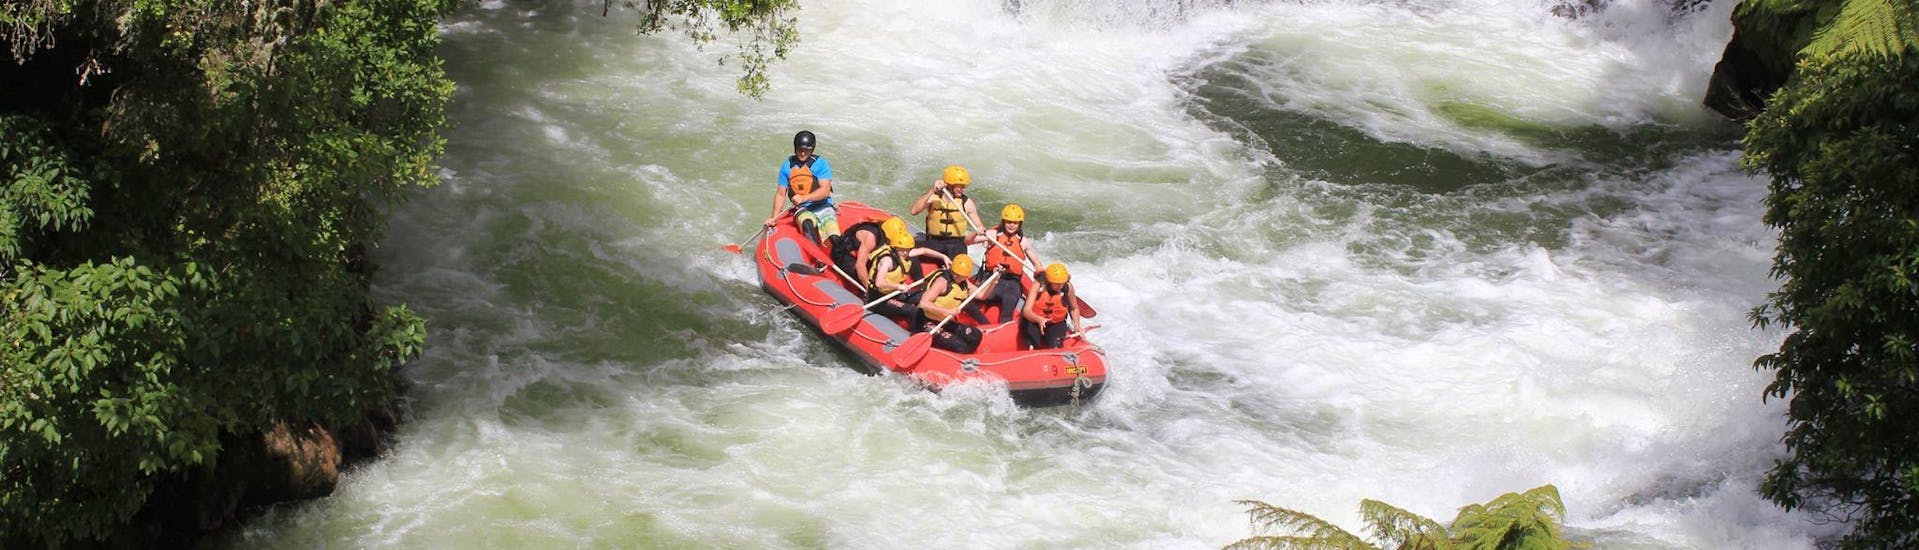 During the Kaituna River Rafting near Rotorua a group of rafters are paddling through the thundering waters of Tutea Falls together with their guide from Rafting Adventures Rotorua.